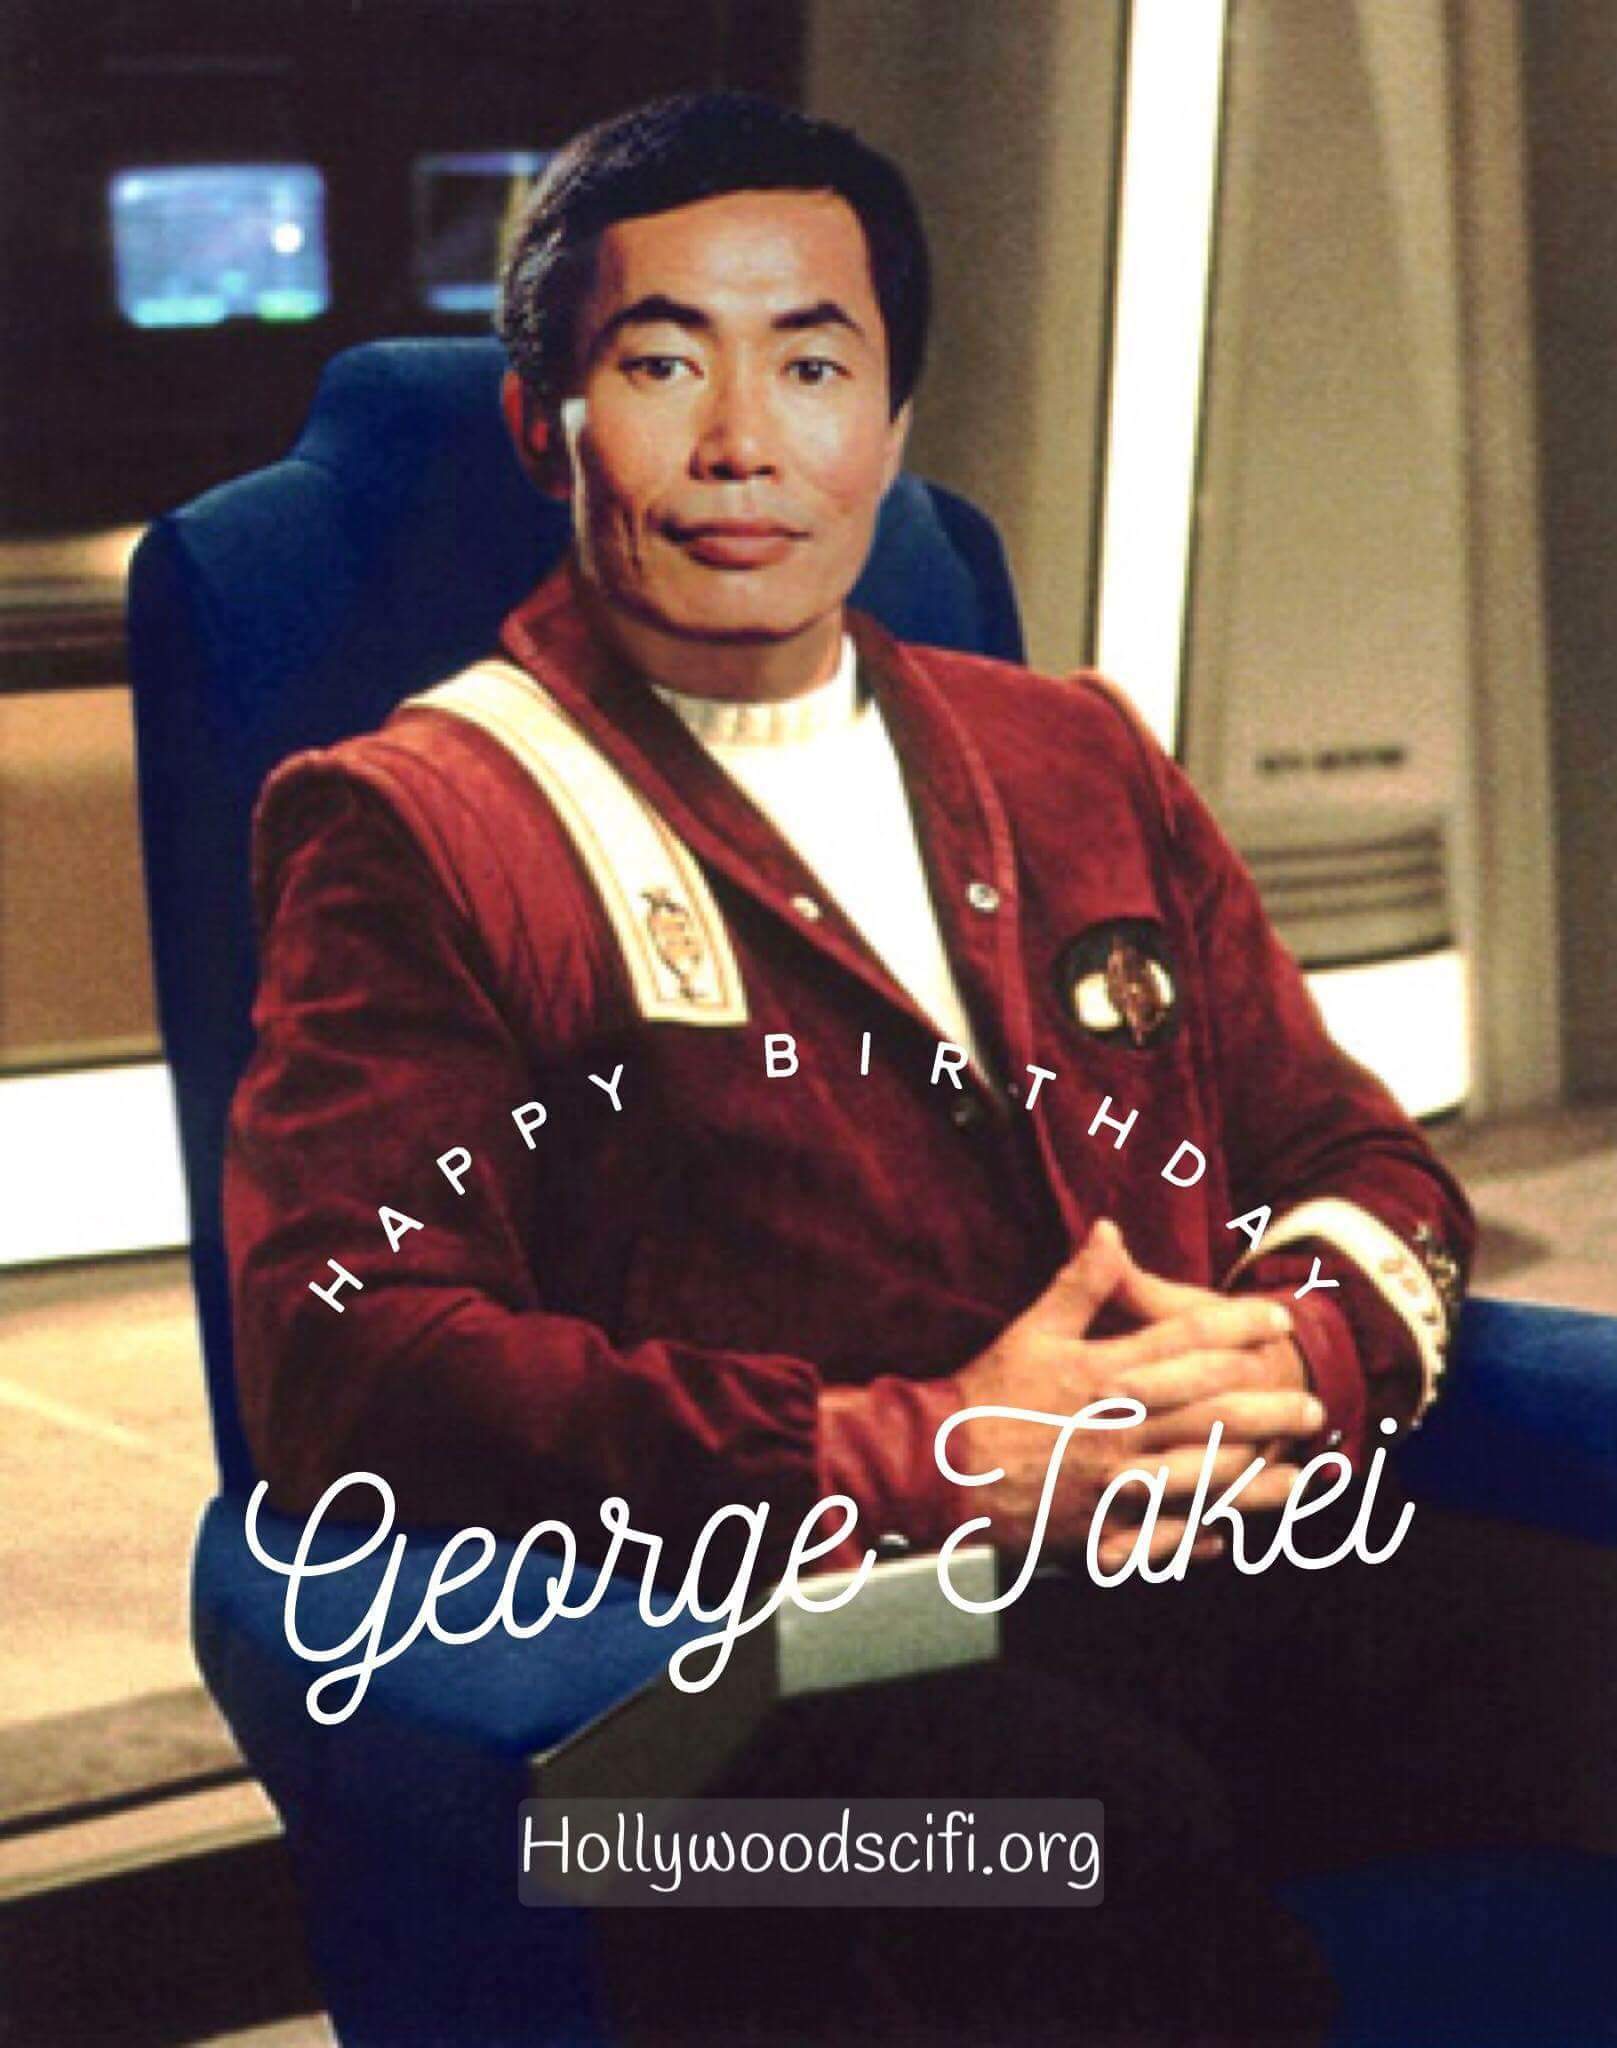 Happy Birthday George Takei! We hope you have a great day and many more.   